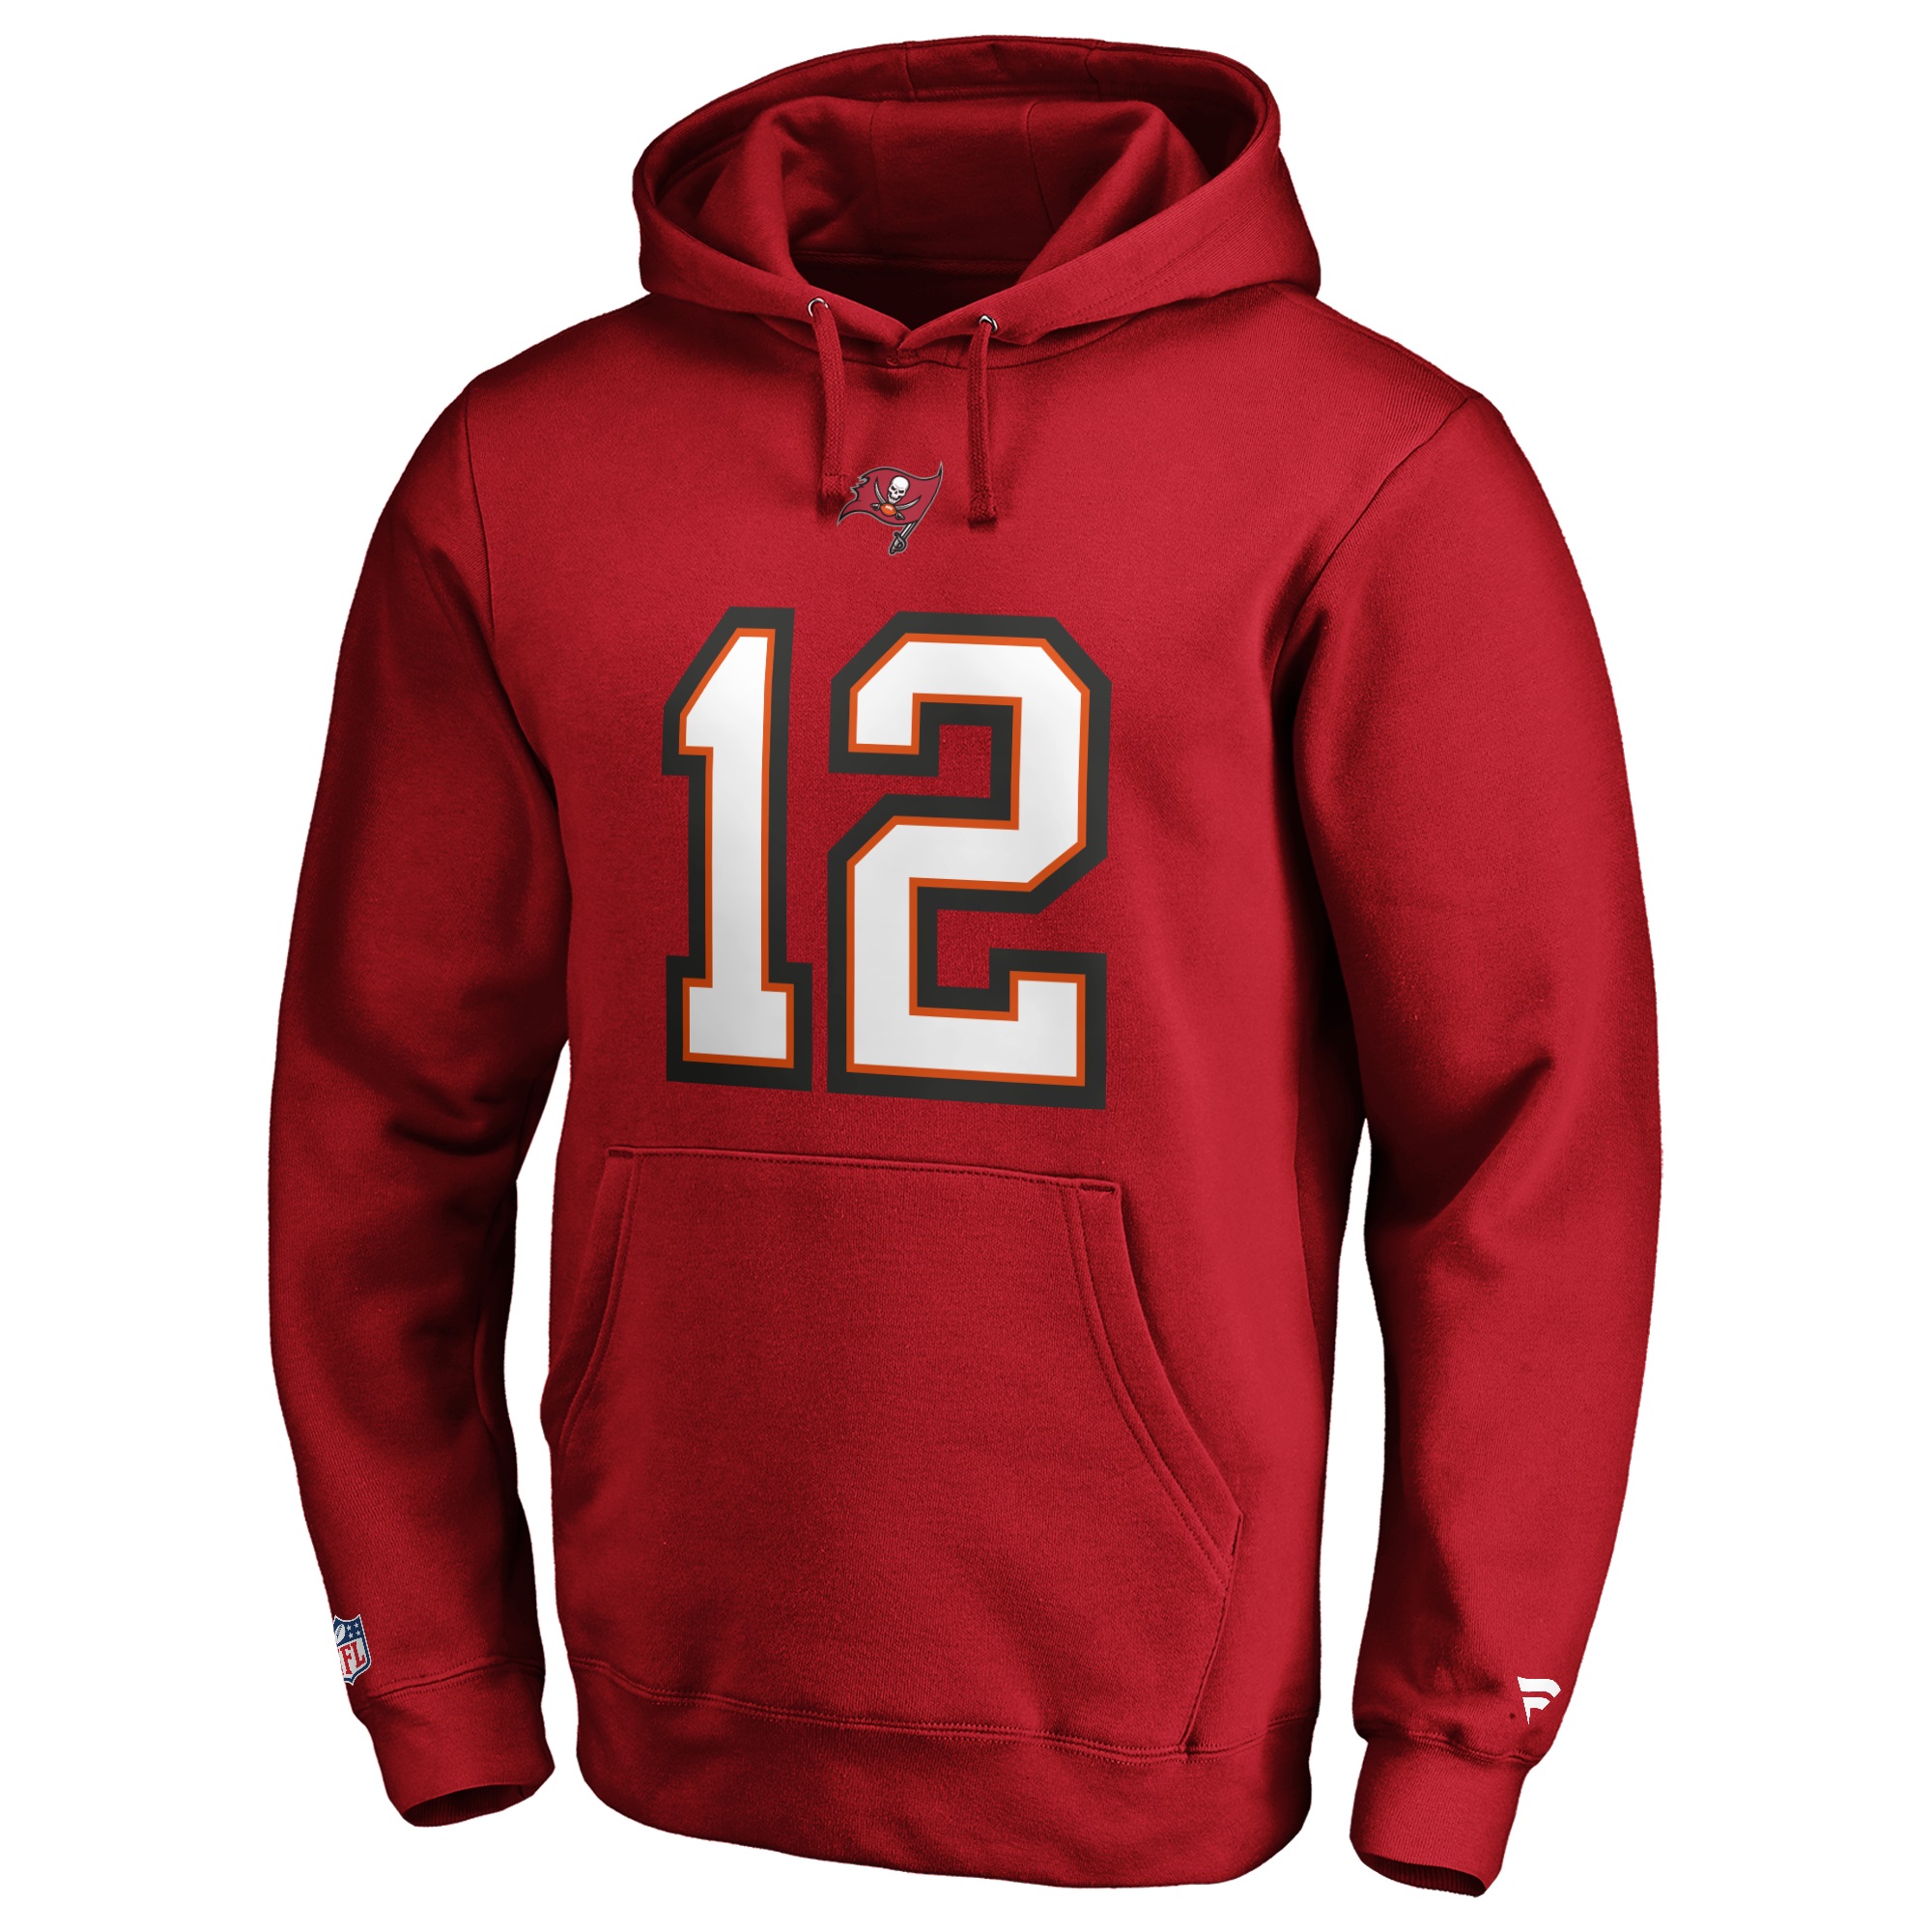 Tom Brady #12 Tampa Bay Buccaneers Iconic Name and Number Graphic Hoody Fanatics